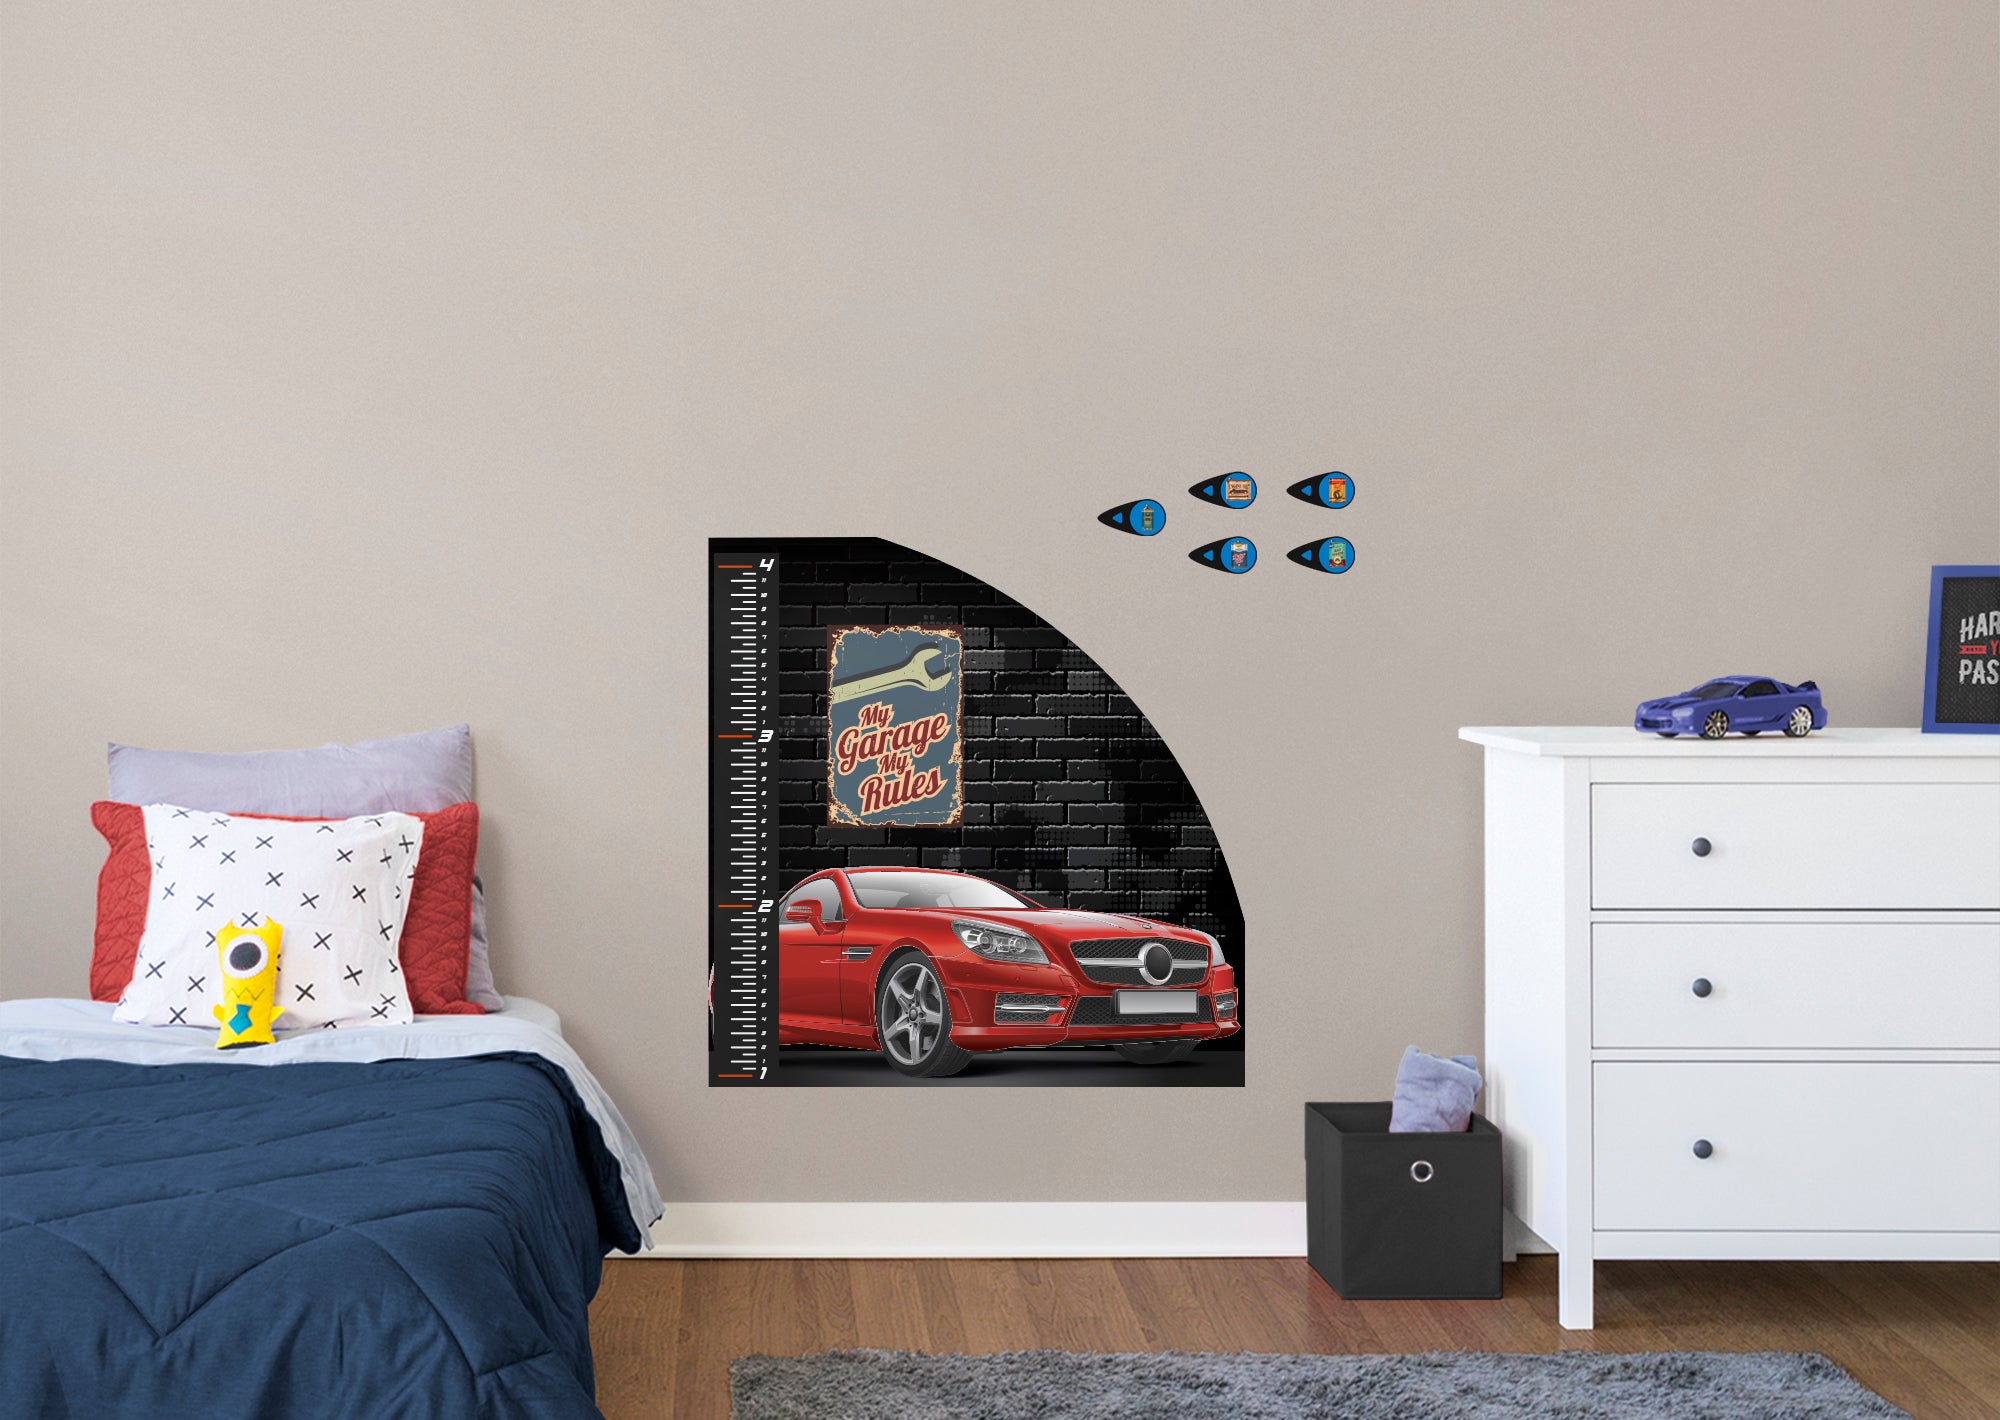 Automobile Growth Charts Hartop Convertible Car - Removable Wall Decal Growth Chart (38"W x 39"H) by Fathead | Vinyl